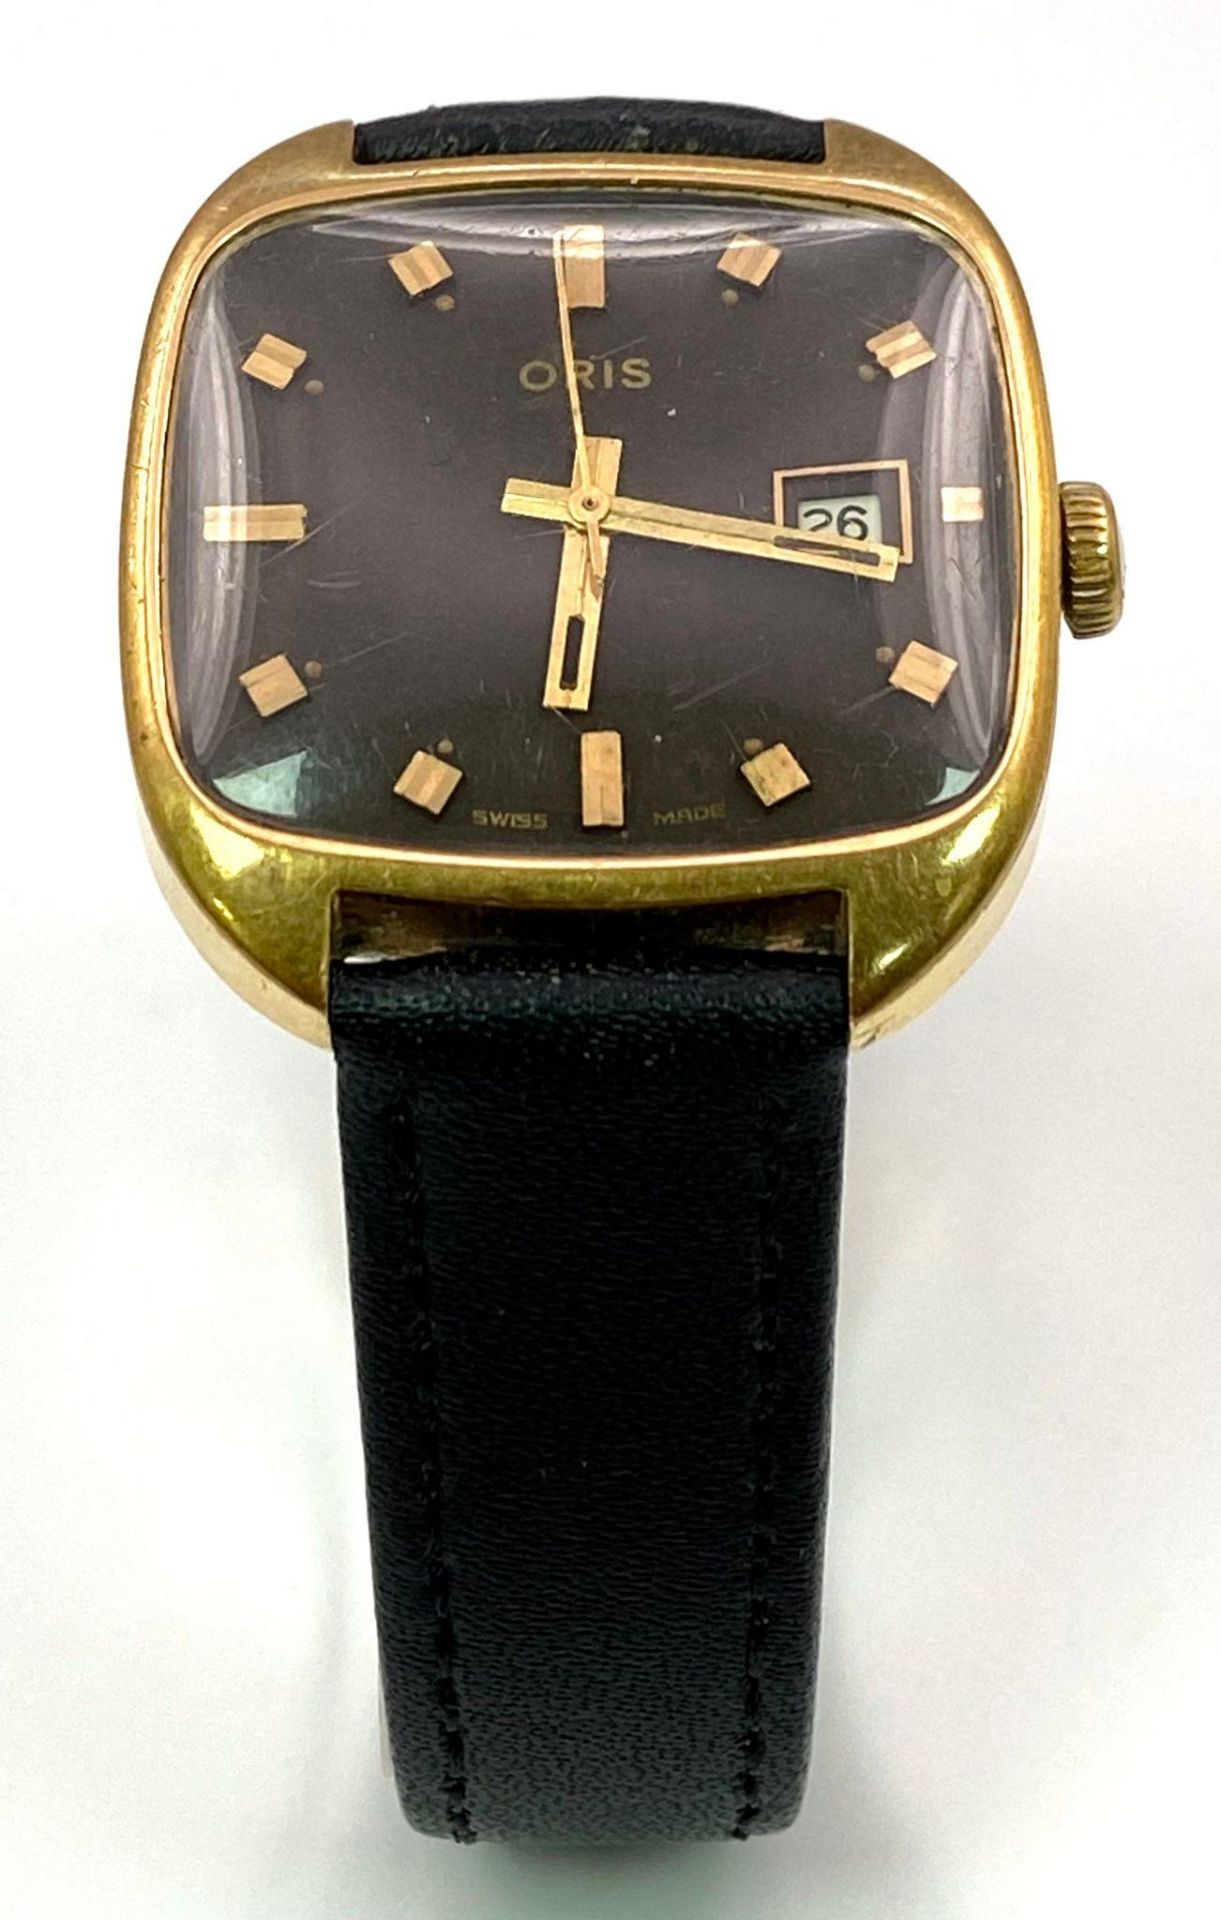 A Vintage 1950s Oris Gents Mechanical Watch. Black leather strap. Gold plated square case - 31mm.